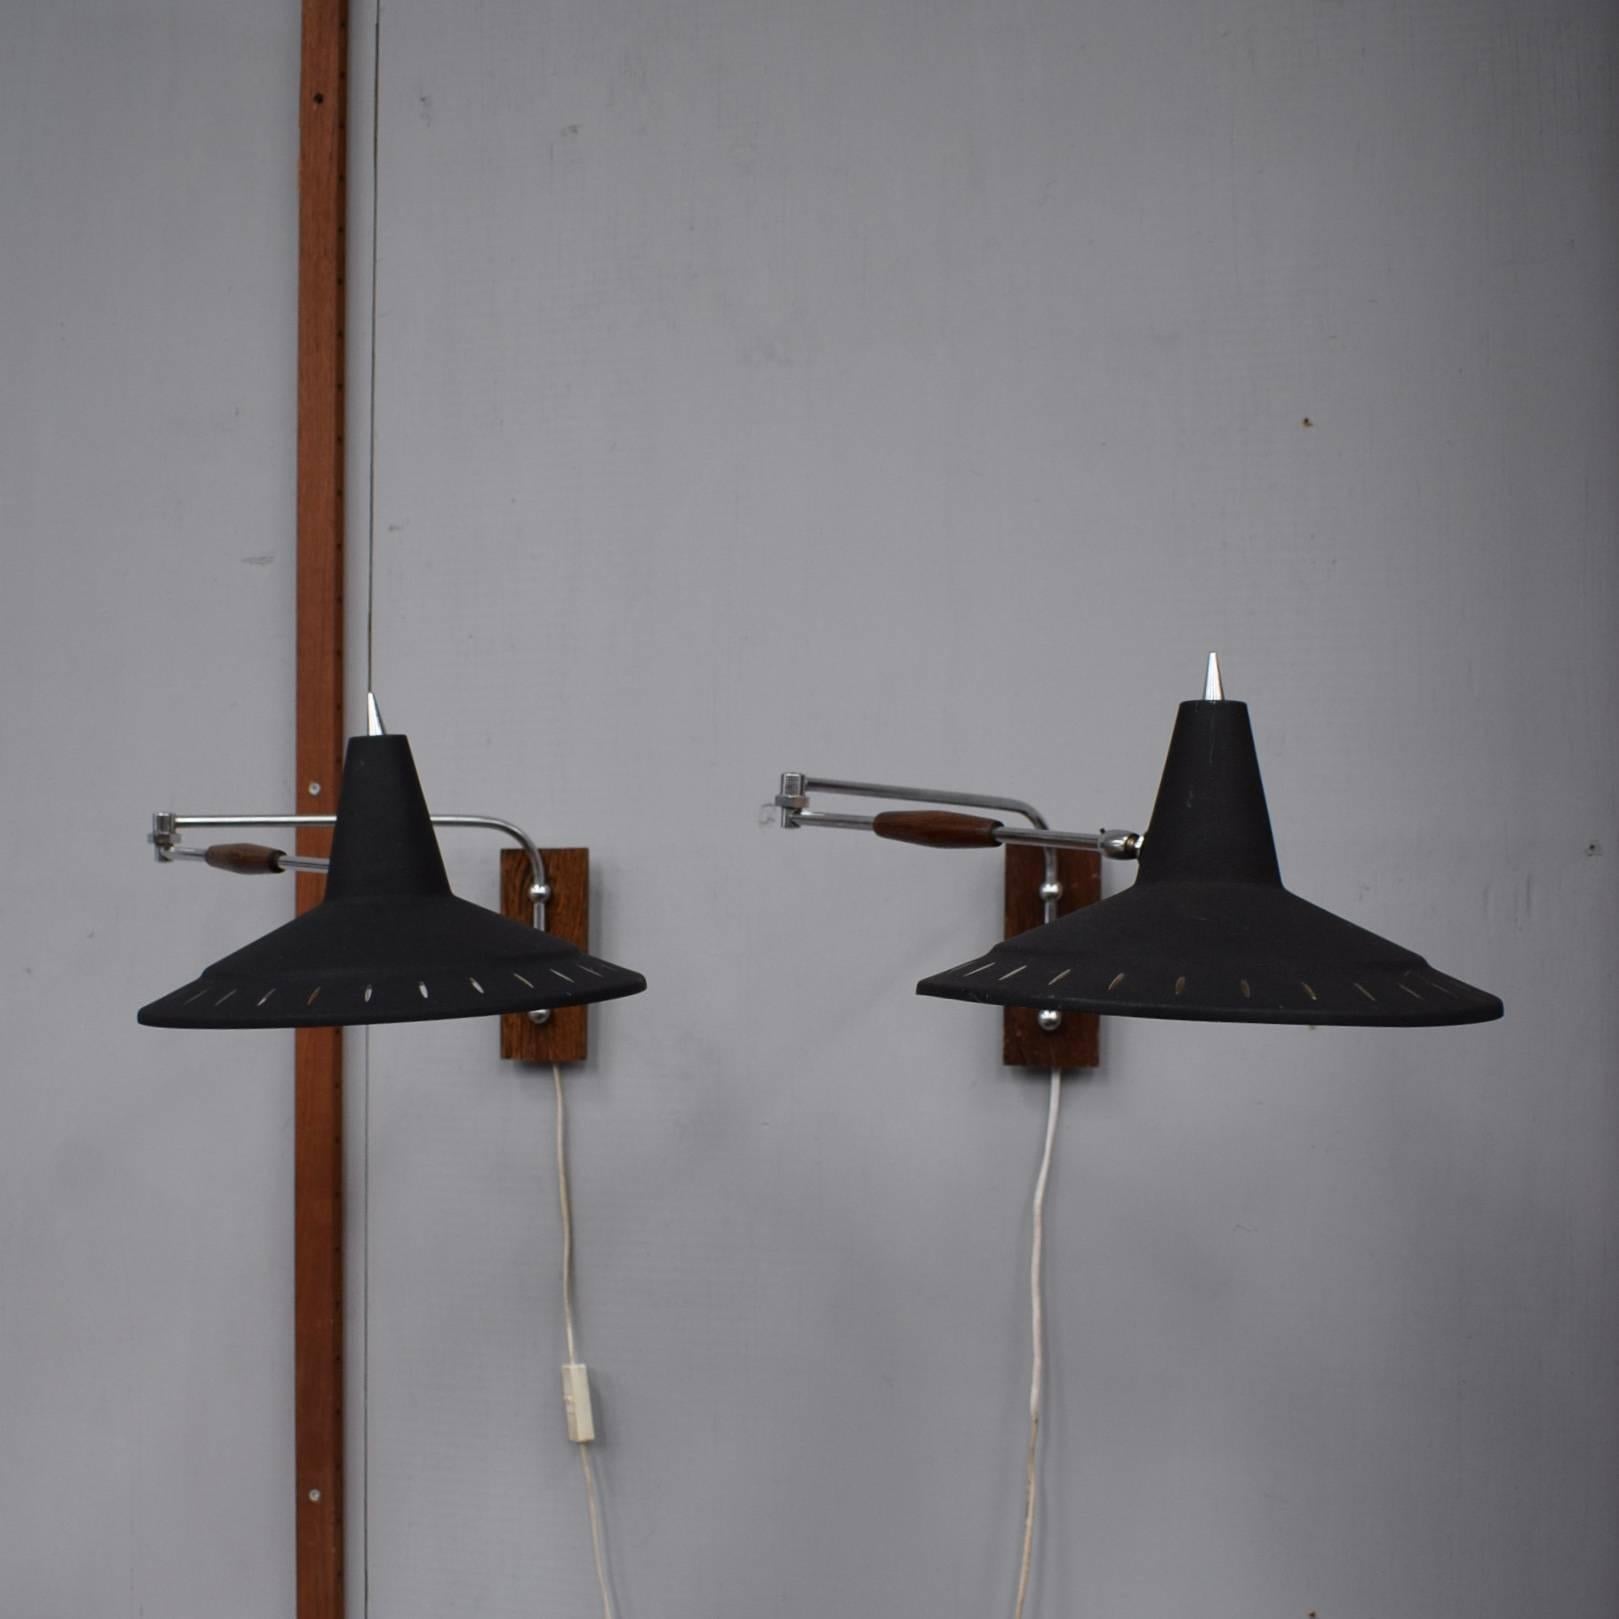 Pair of swing arm wall lamps produced by Anvia from the Dutch city of Almelo.
Anvia stands for ‘Algemene Nederlandse Verlichtings Industrie
Almelo’, which roughly translates into ‘General Dutch Lighting Industry Almelo’. The company was one of the